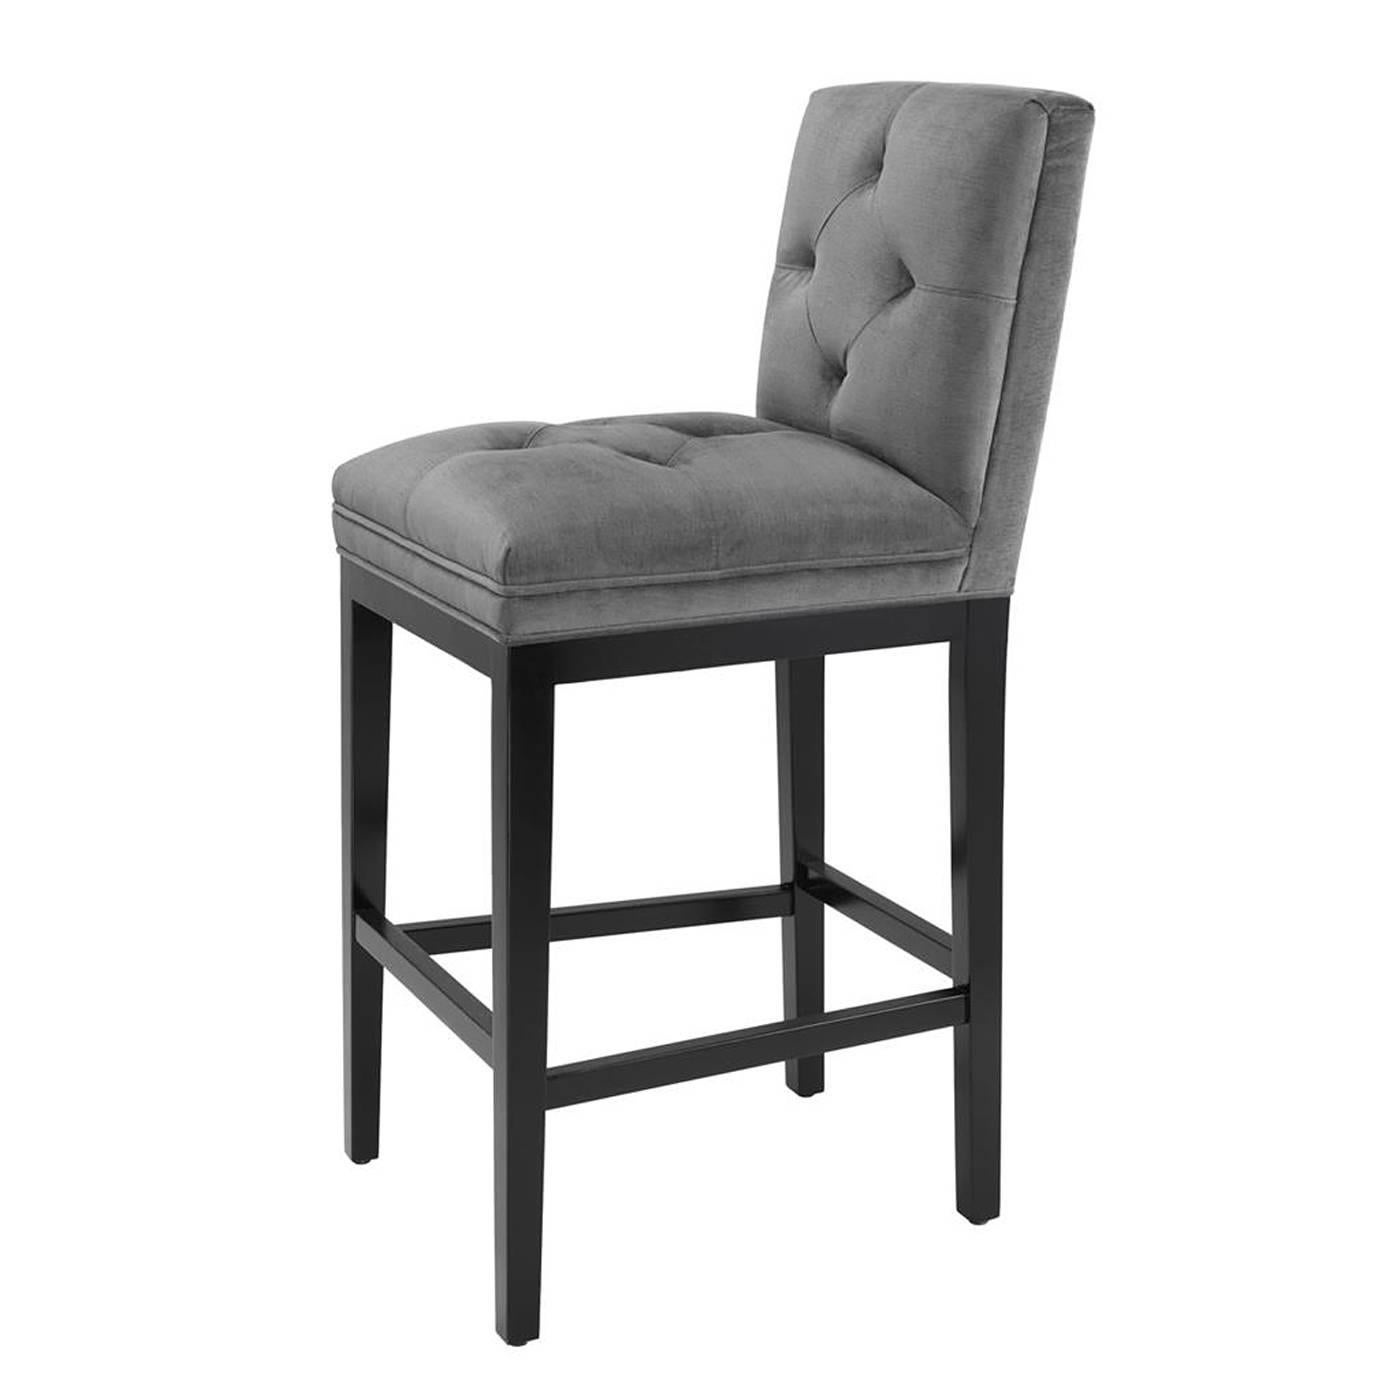 Bar Stool Grand Office upholstered with granite 
grey fabric with fire retardant treatment. Structure 
in solid wood and black legs. 
Also available in pebble grey fabric.
Also available in armchair, chair, sofa, swivel desk 
armchair.
